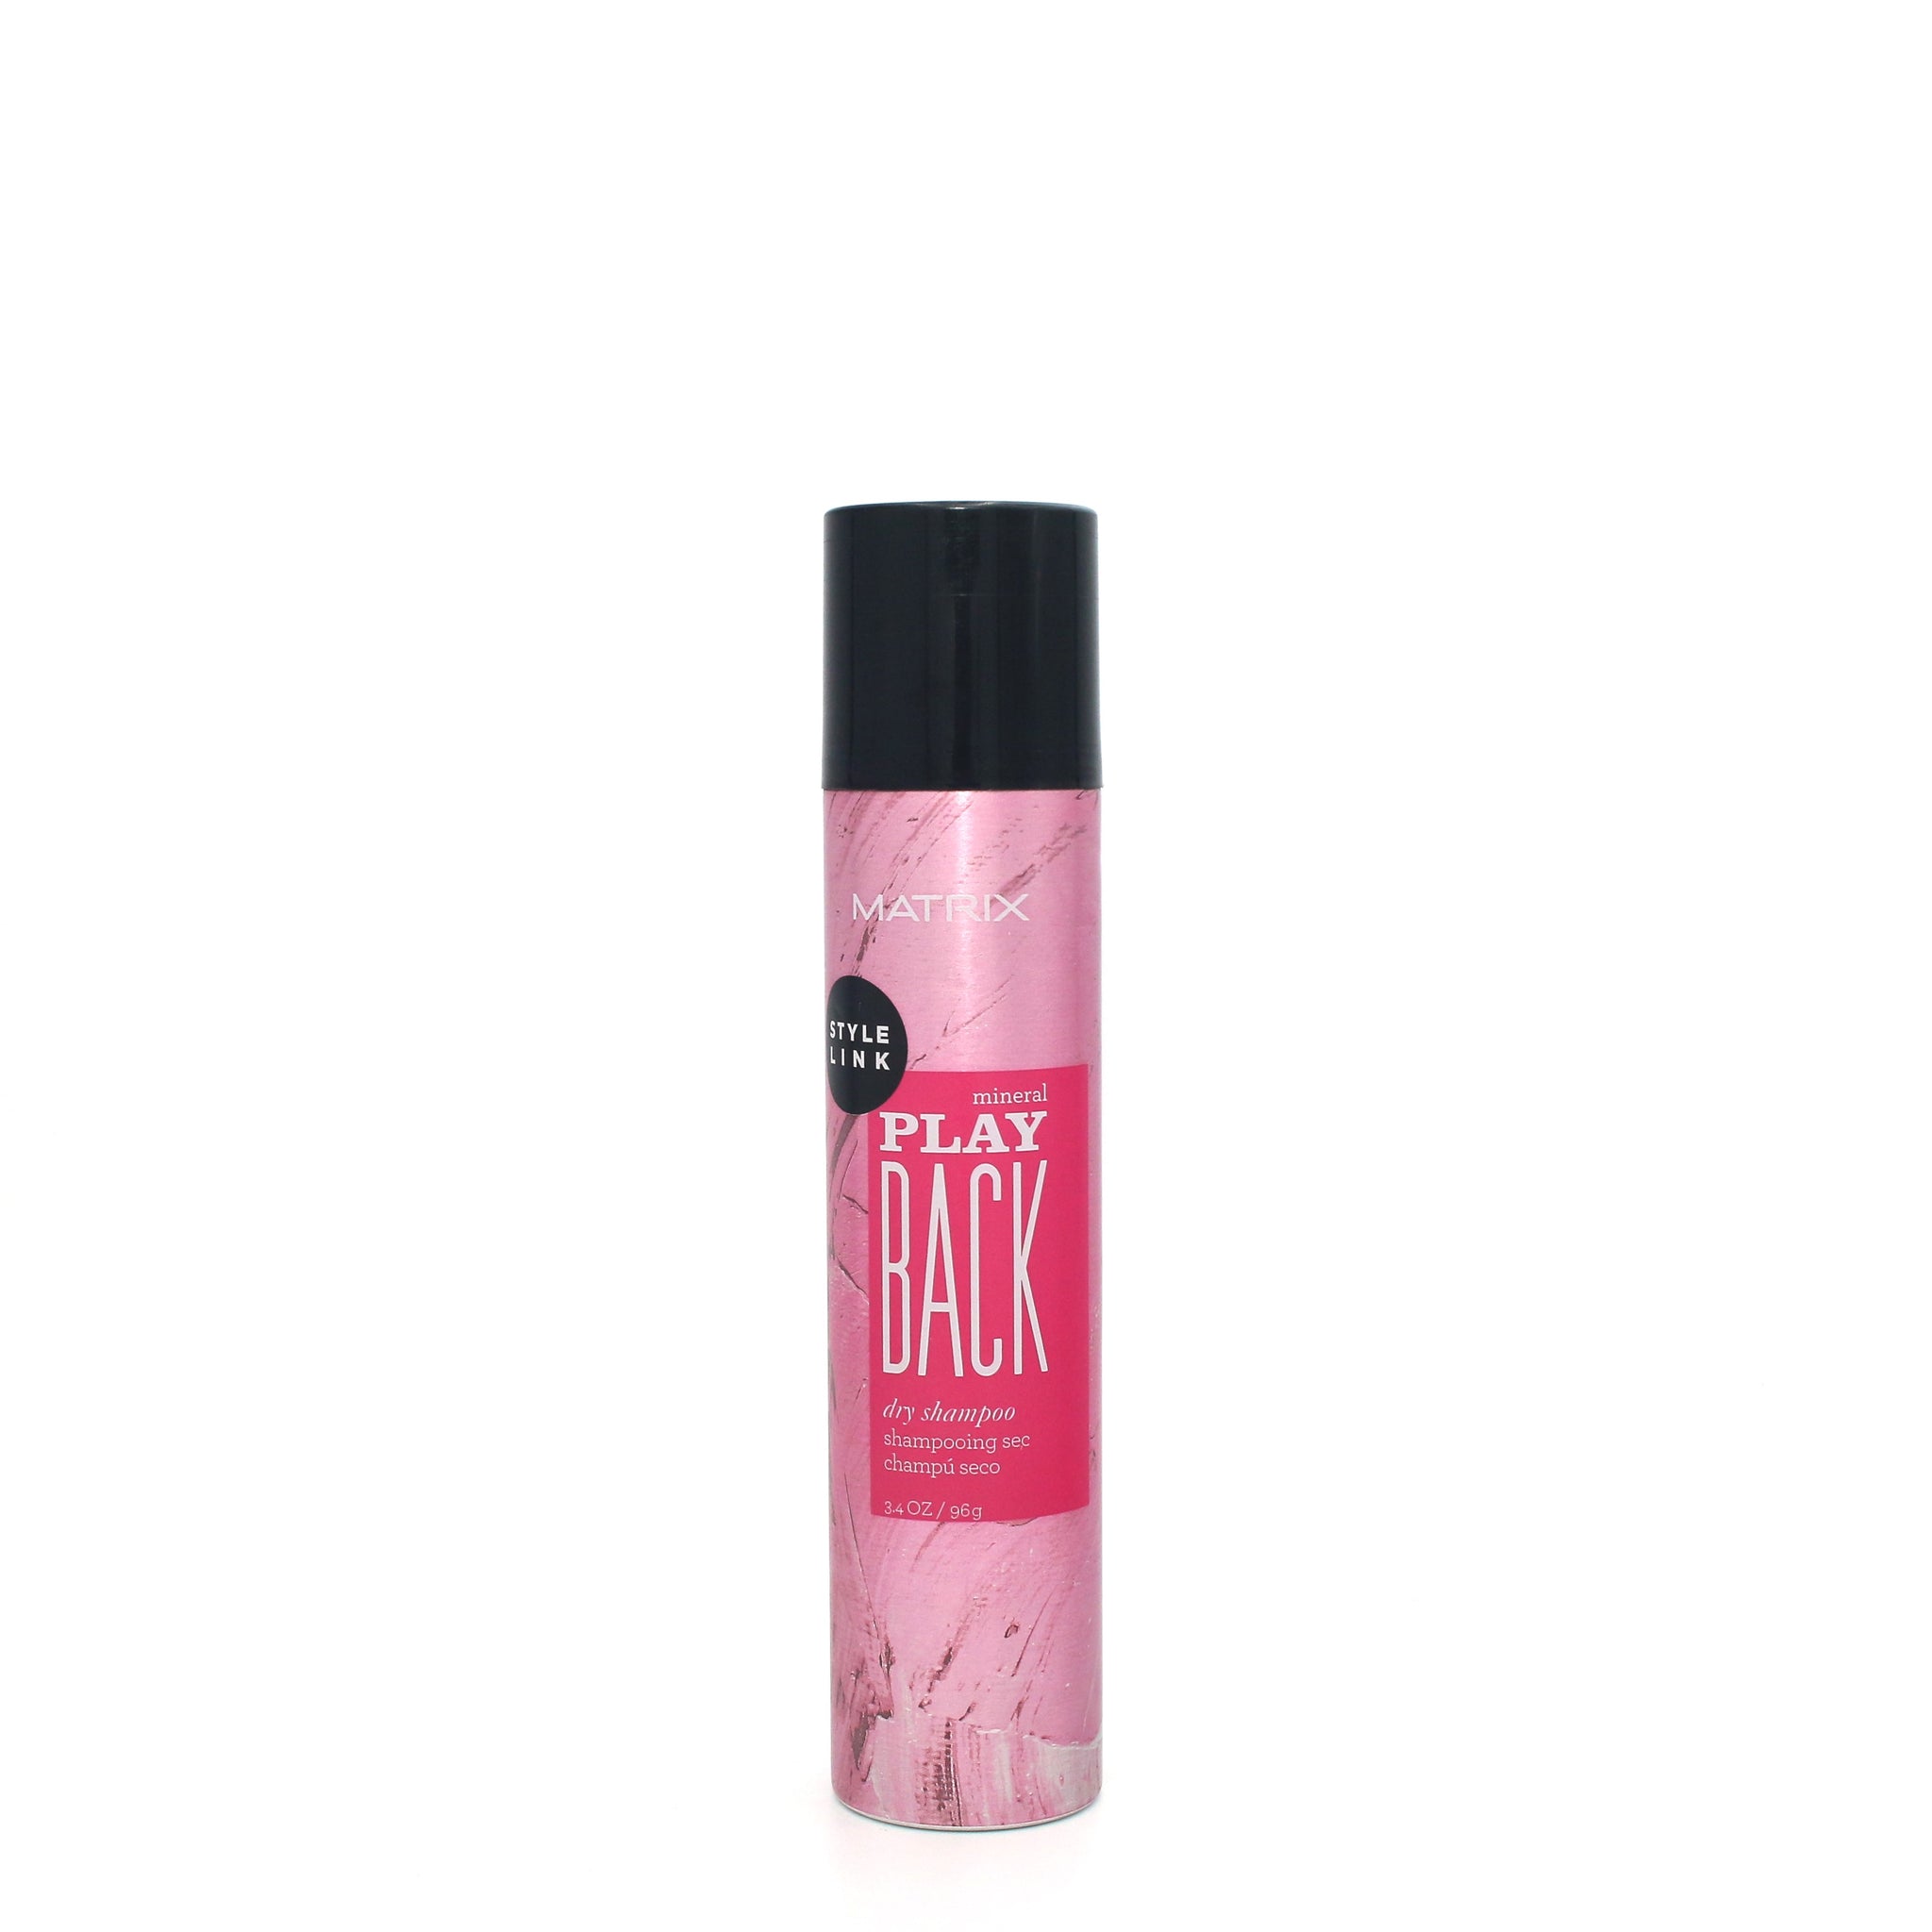 MATRIX Style Link Mineral Play Back Dry Shampoo 3.4 oz (Pack of 2)